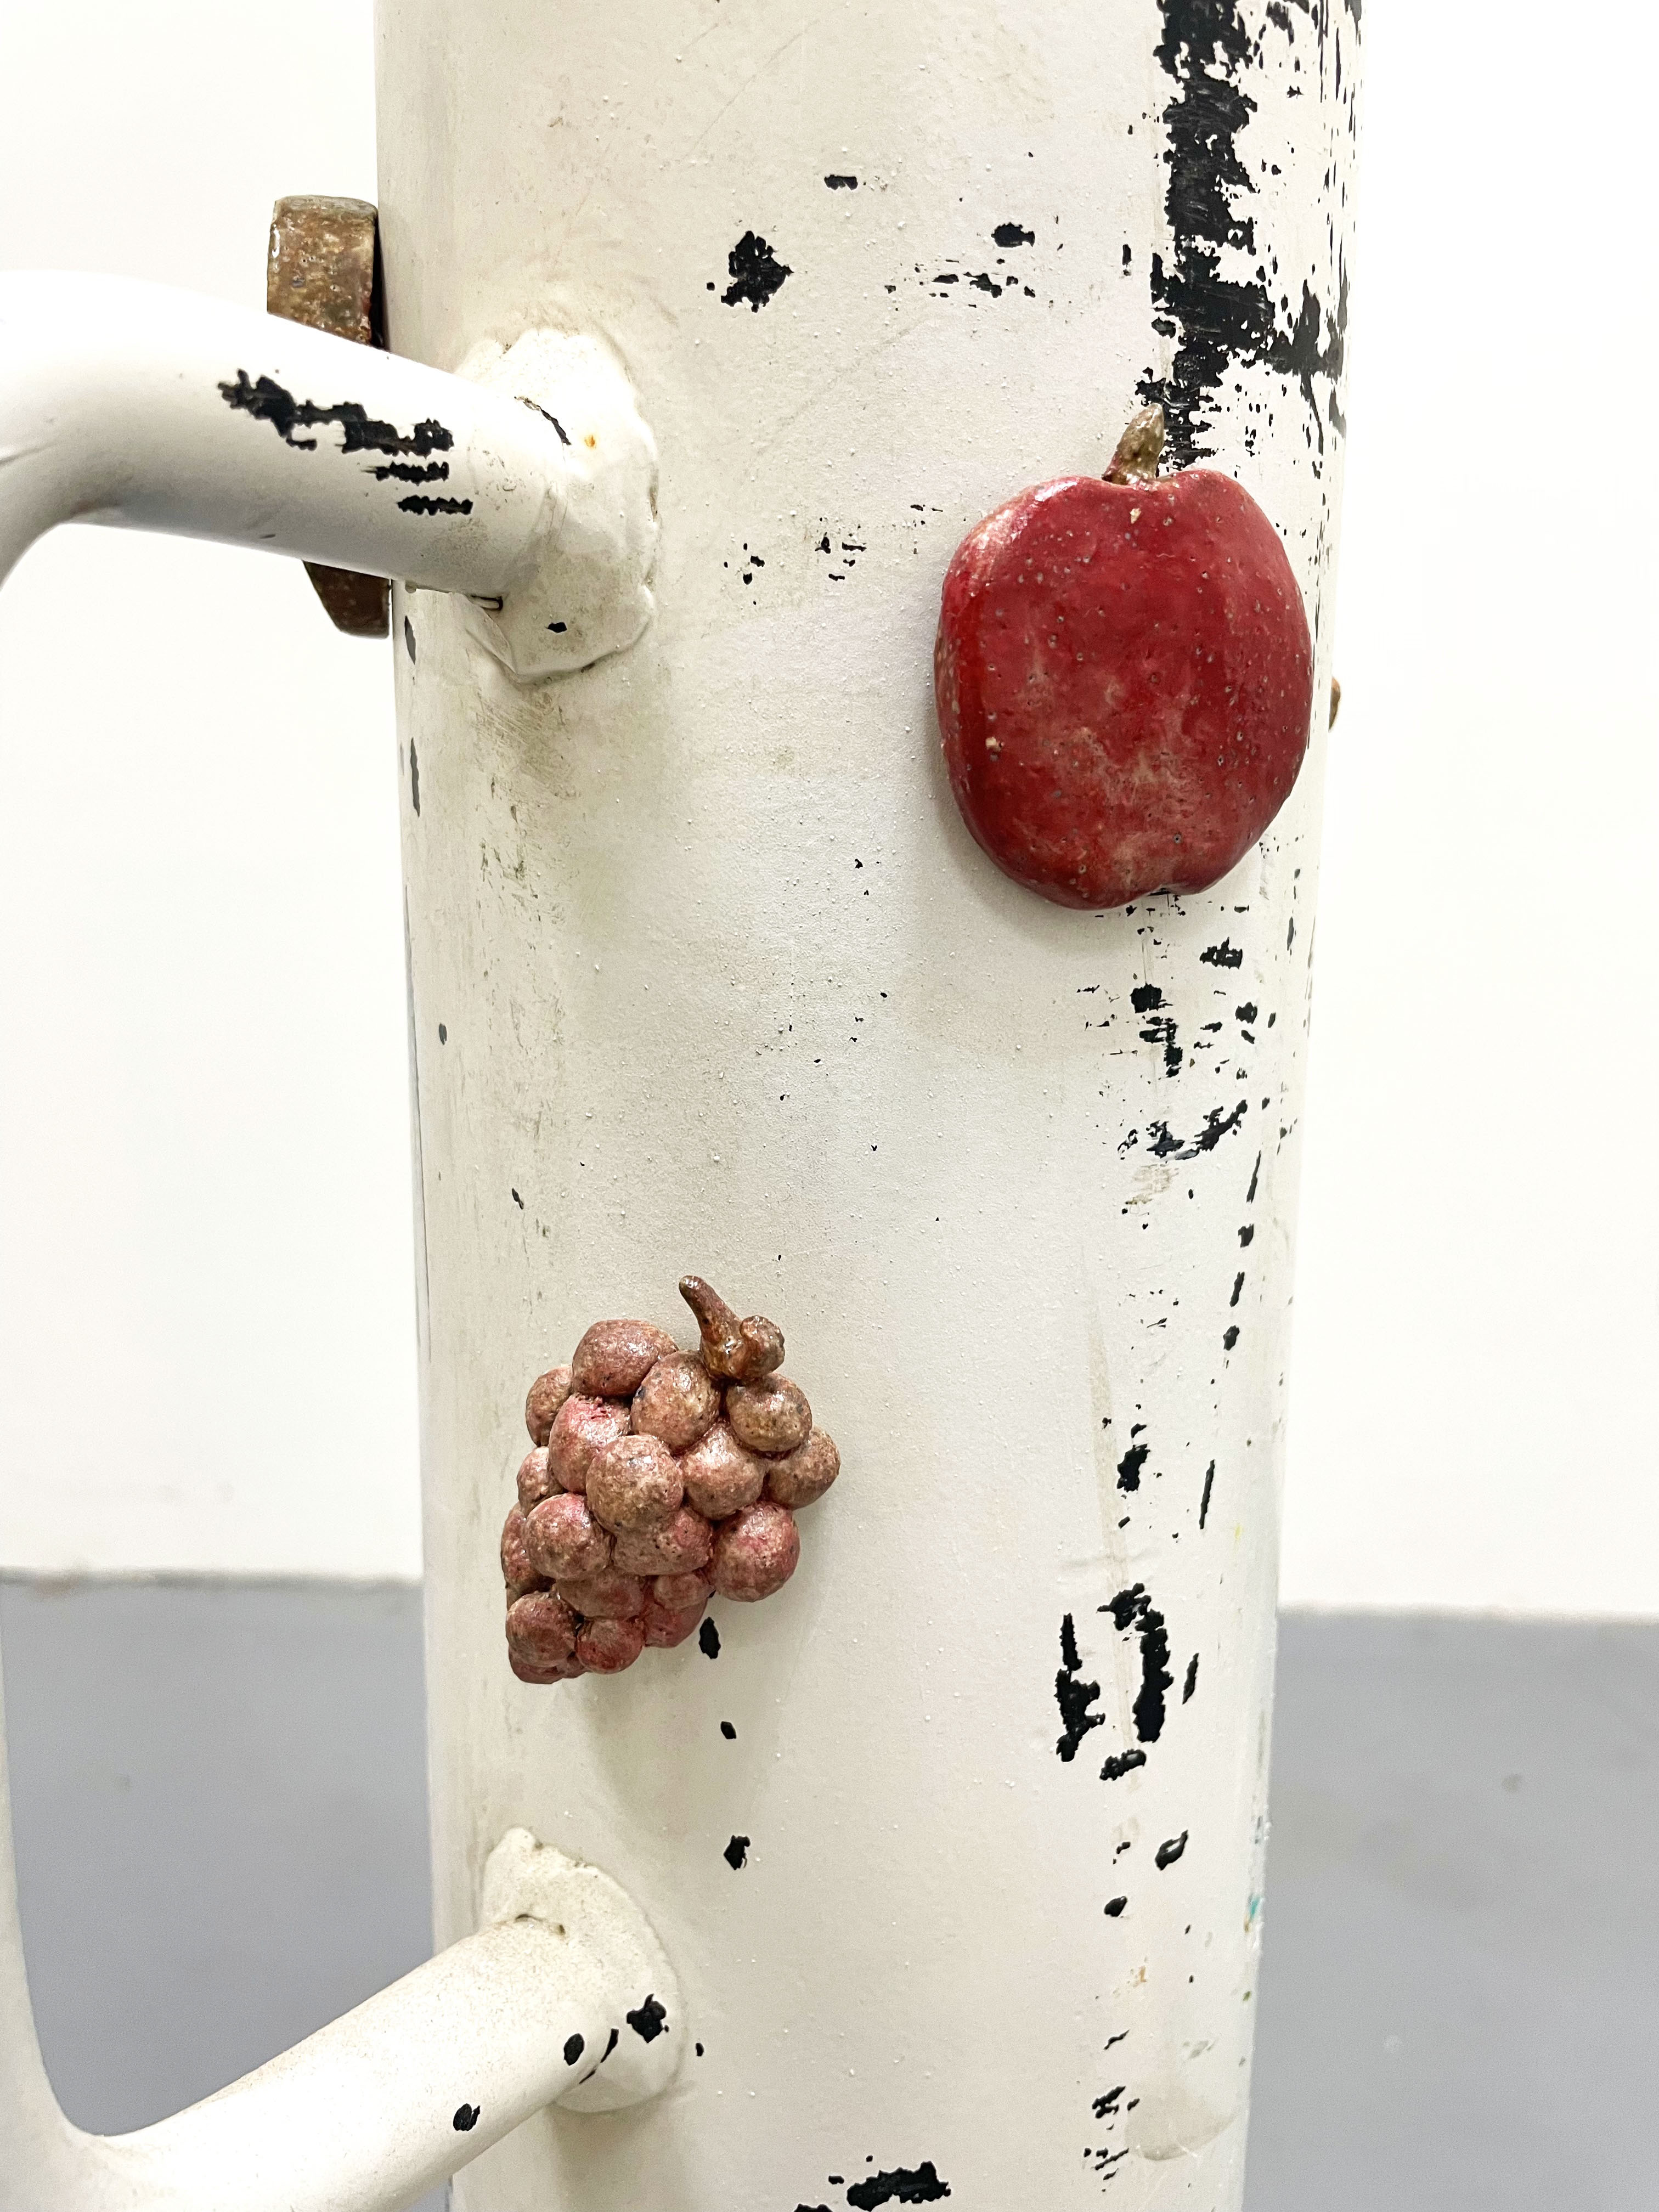 A Fruited Plane - A sculpture by Brian Dario, Featuring a close up of a paint chipped battering ram, showing the details of grape and apple ceramic fruit magnets